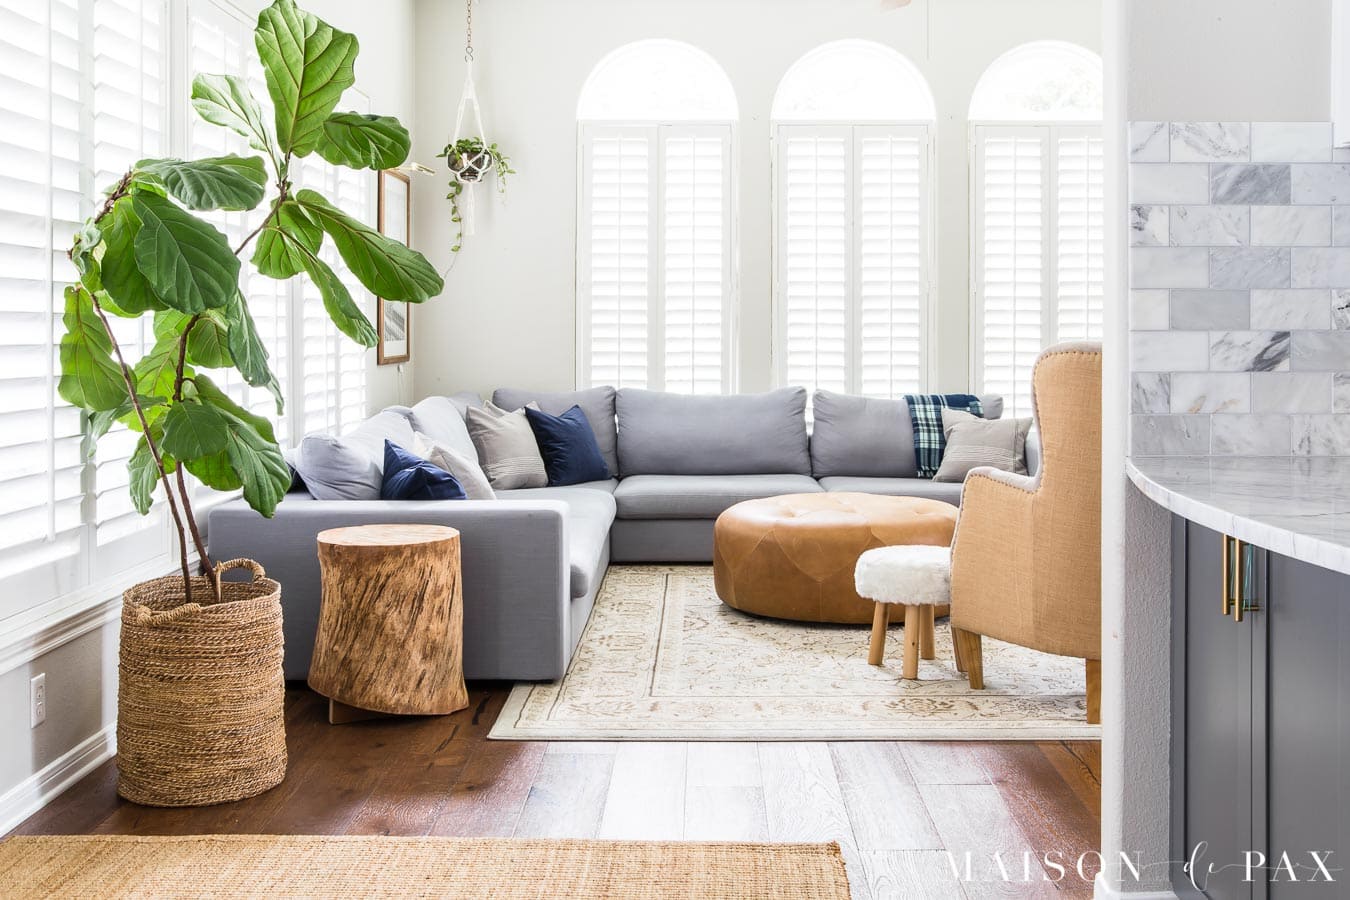 Gray, white, and navy living room with warm netural textures